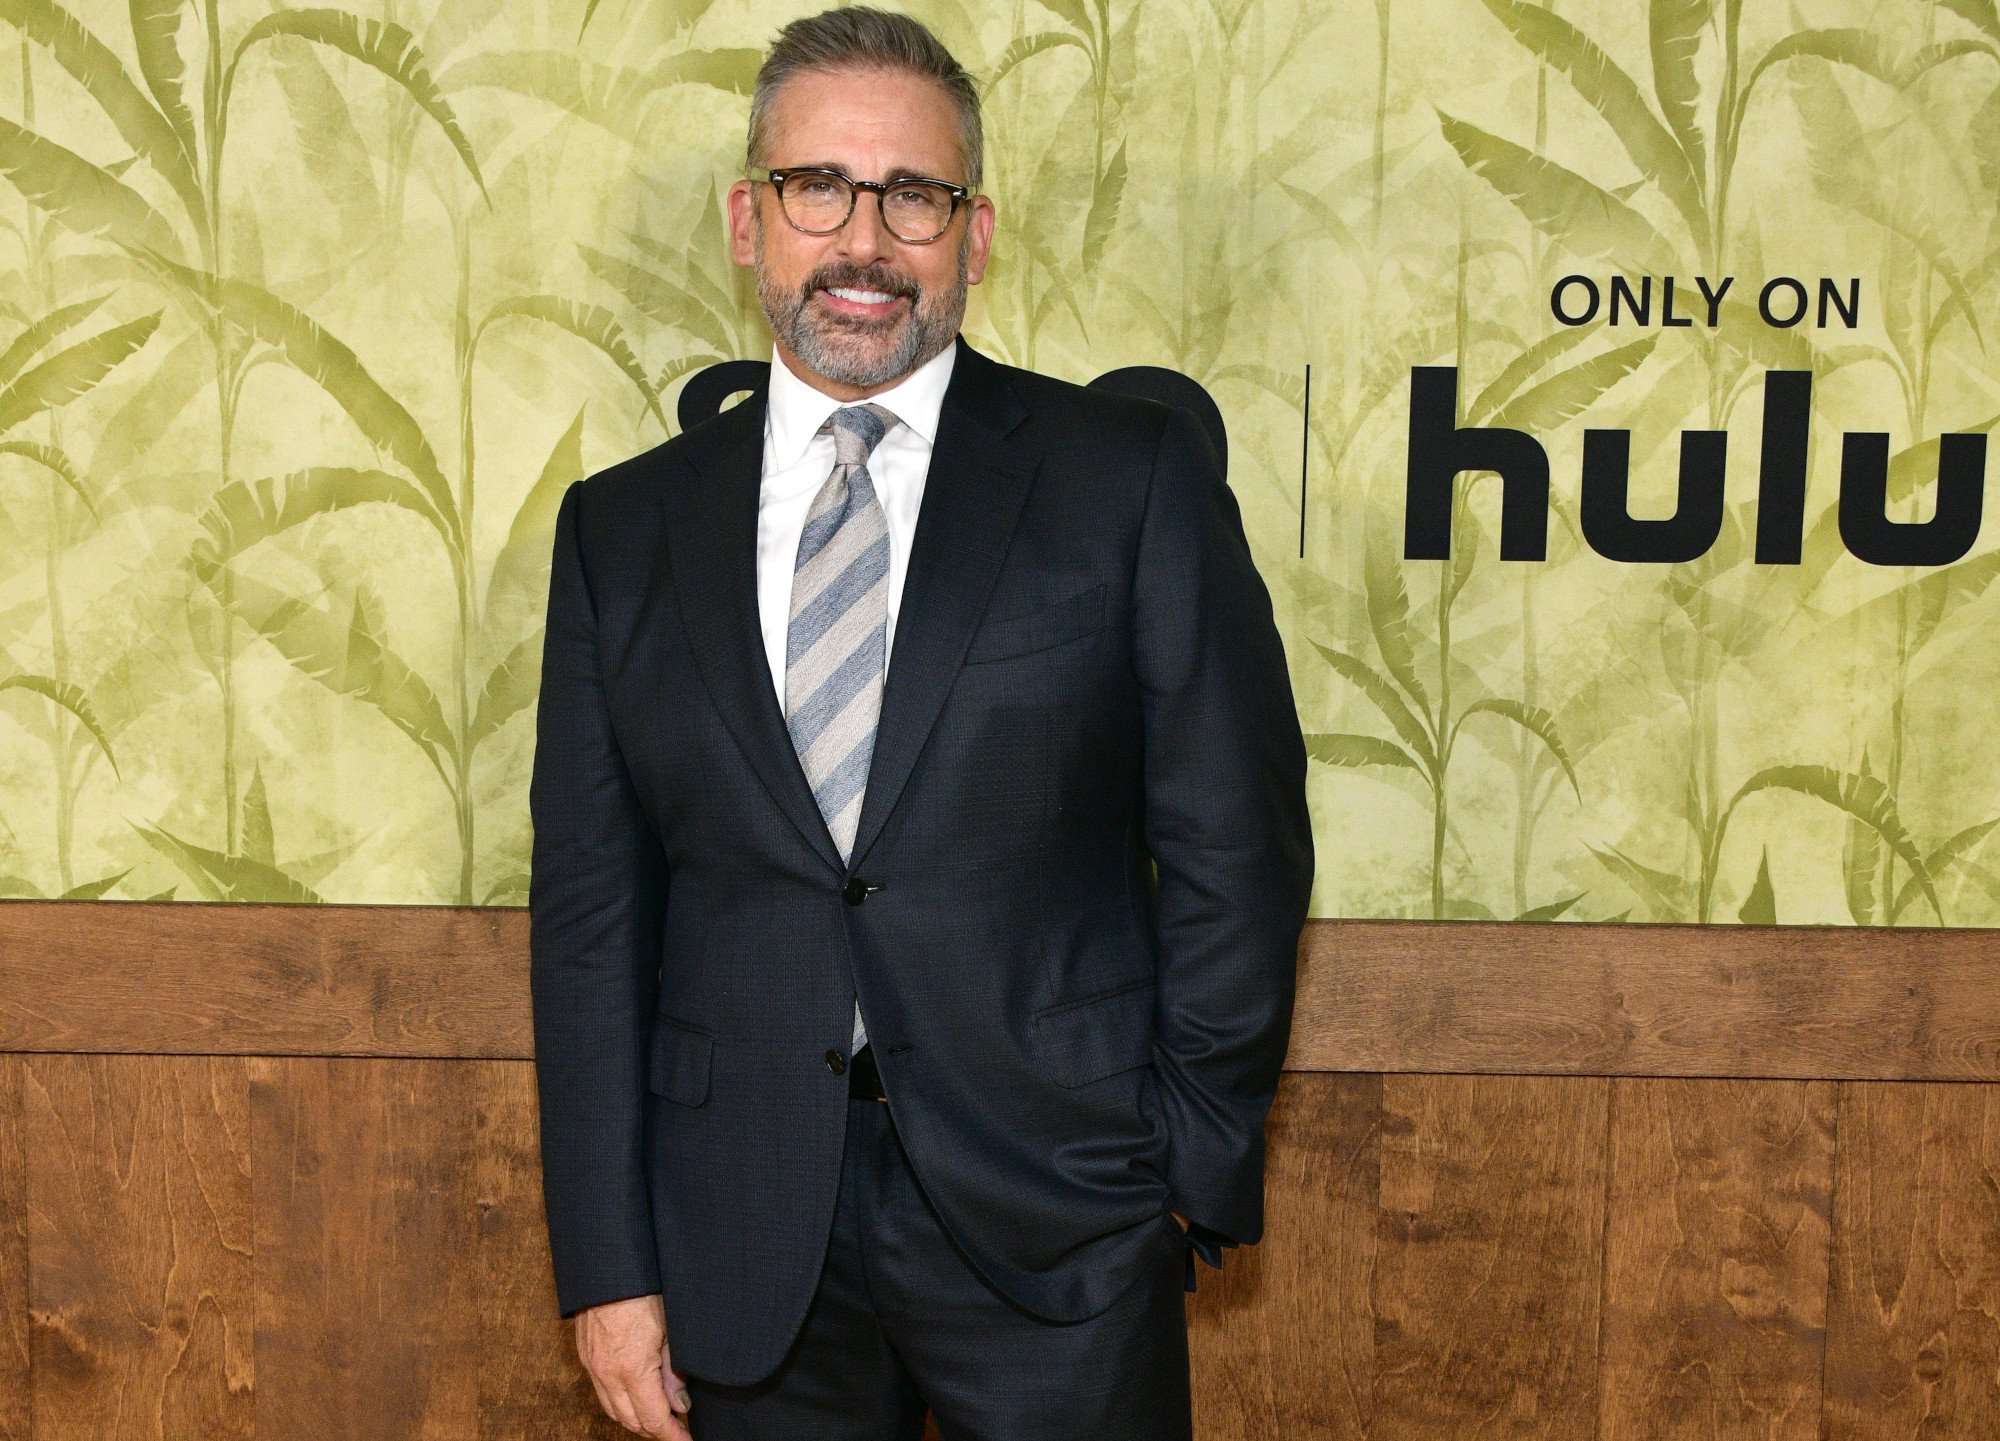 Steve Carell at the premiere for 'The Patient.' He's wearing a black suit and grey striped tie, and he's standing in front of a gold and brown wall that says 'Hulu' on it.